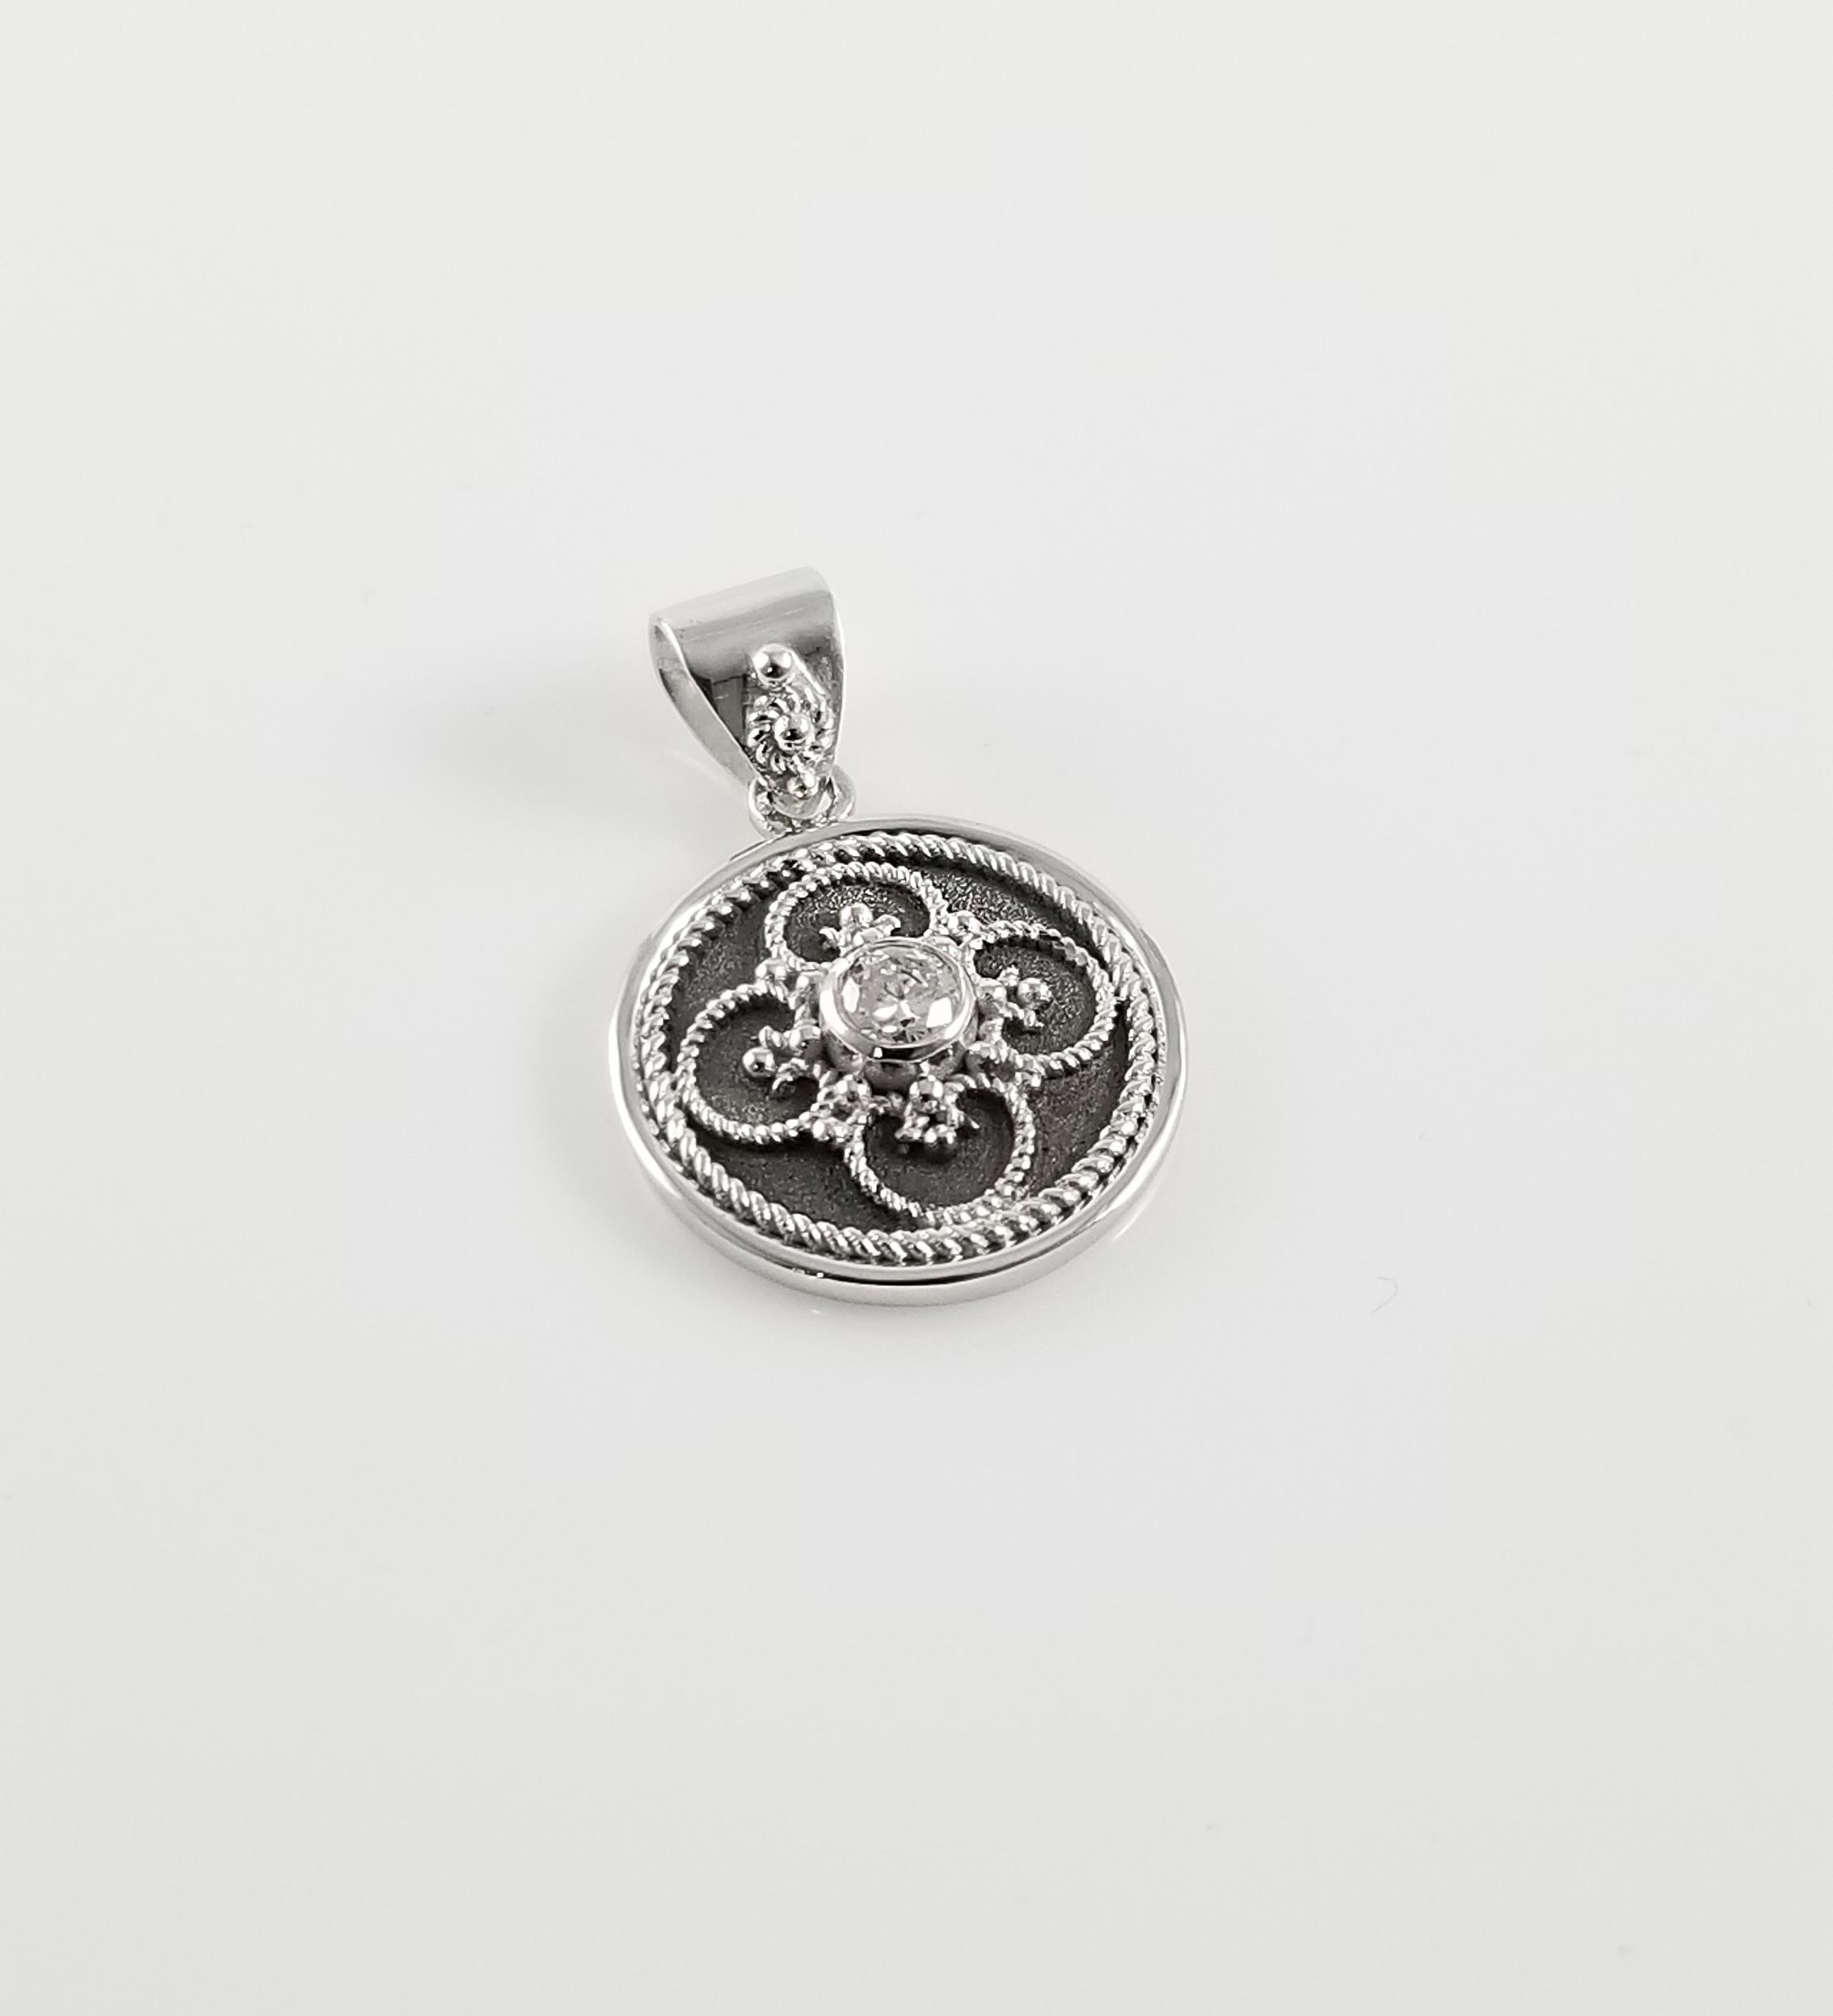 S.Georgios designer Pendant is all handmade from solid 18 Karat White Gold. This elegant pendant is microscopically decorated - it has granulation work all the way around with white gold beads and wires shaped like the last letter of the Greek